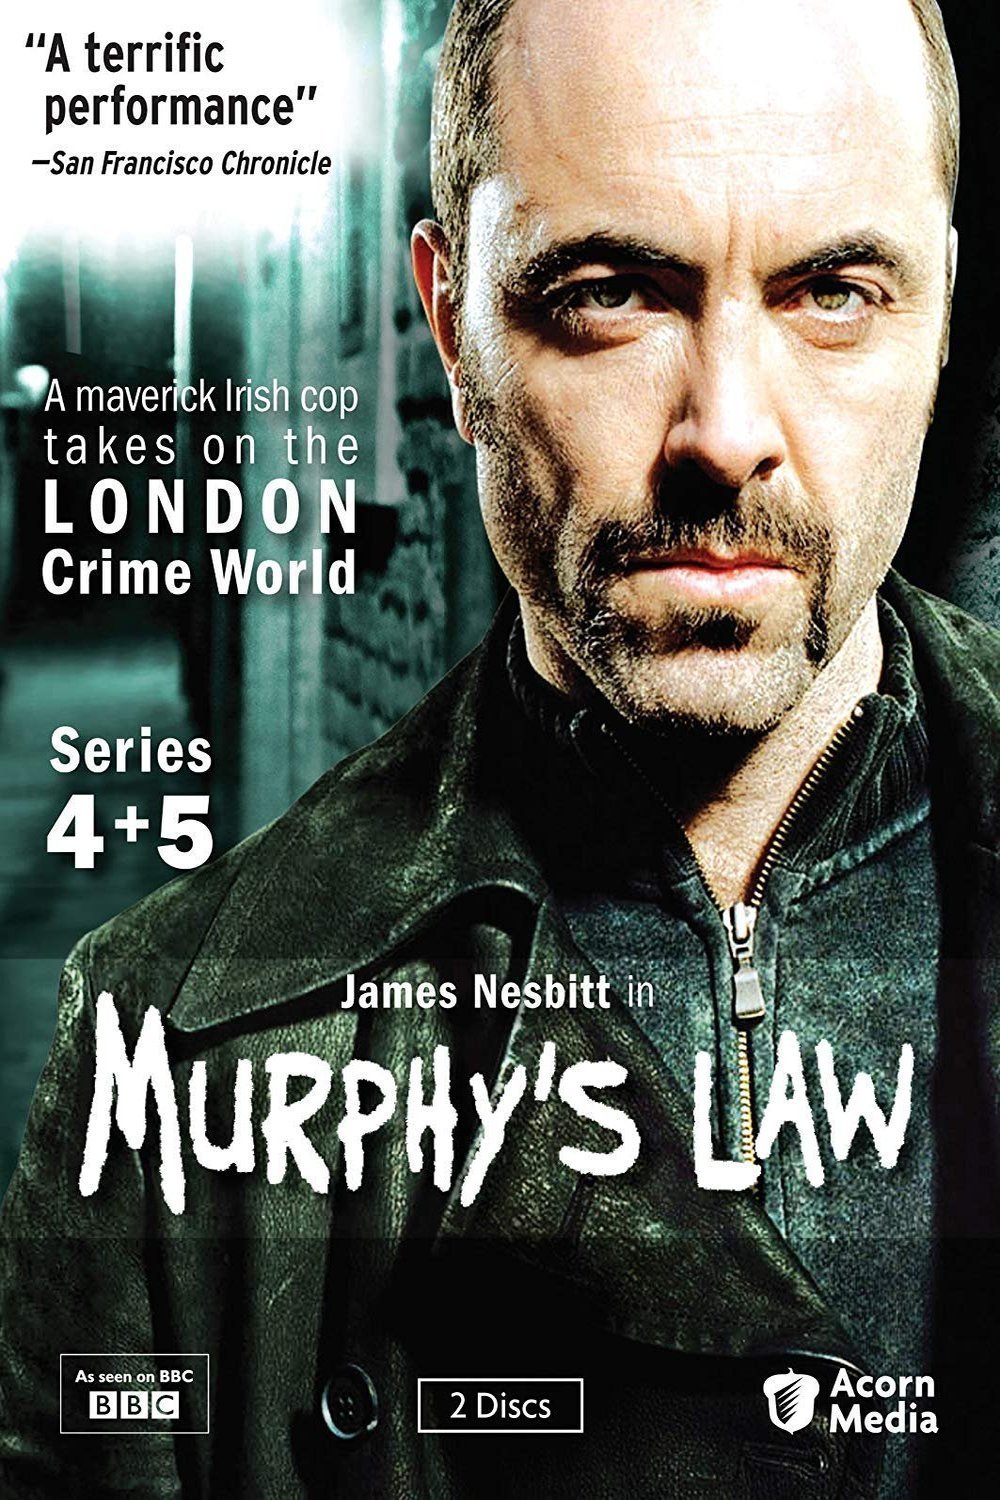 Poster of the movie Murphy's Law